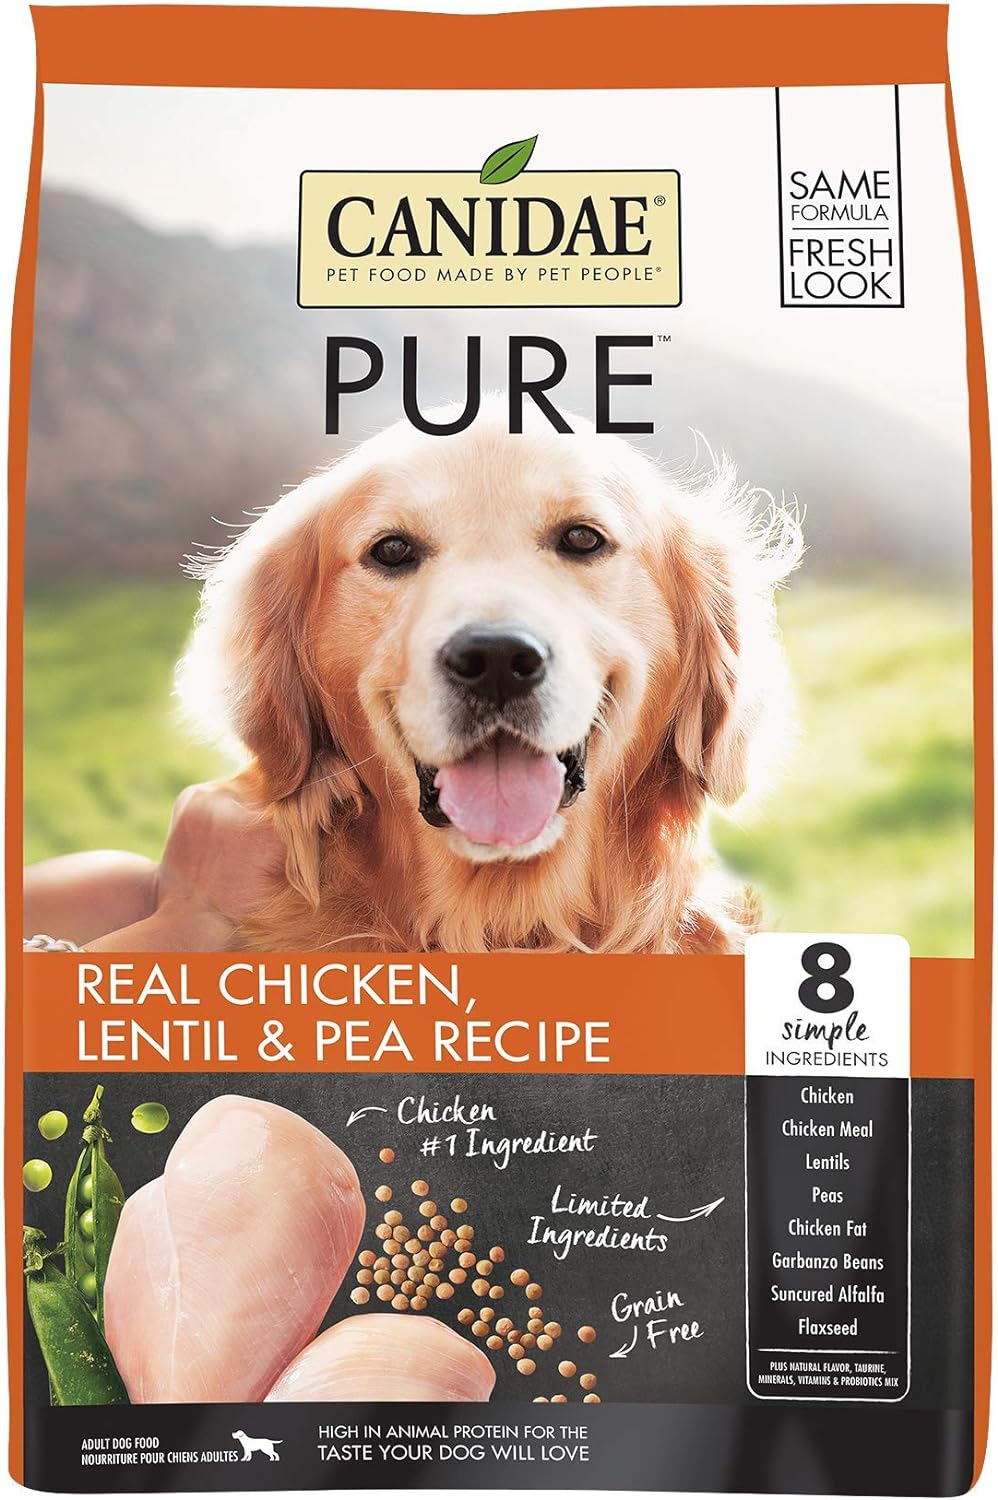 Canidae Pure Grain-Free Real Chicken, Lentil & Pea Recipe Dry Dog Food – Gallery Image 1